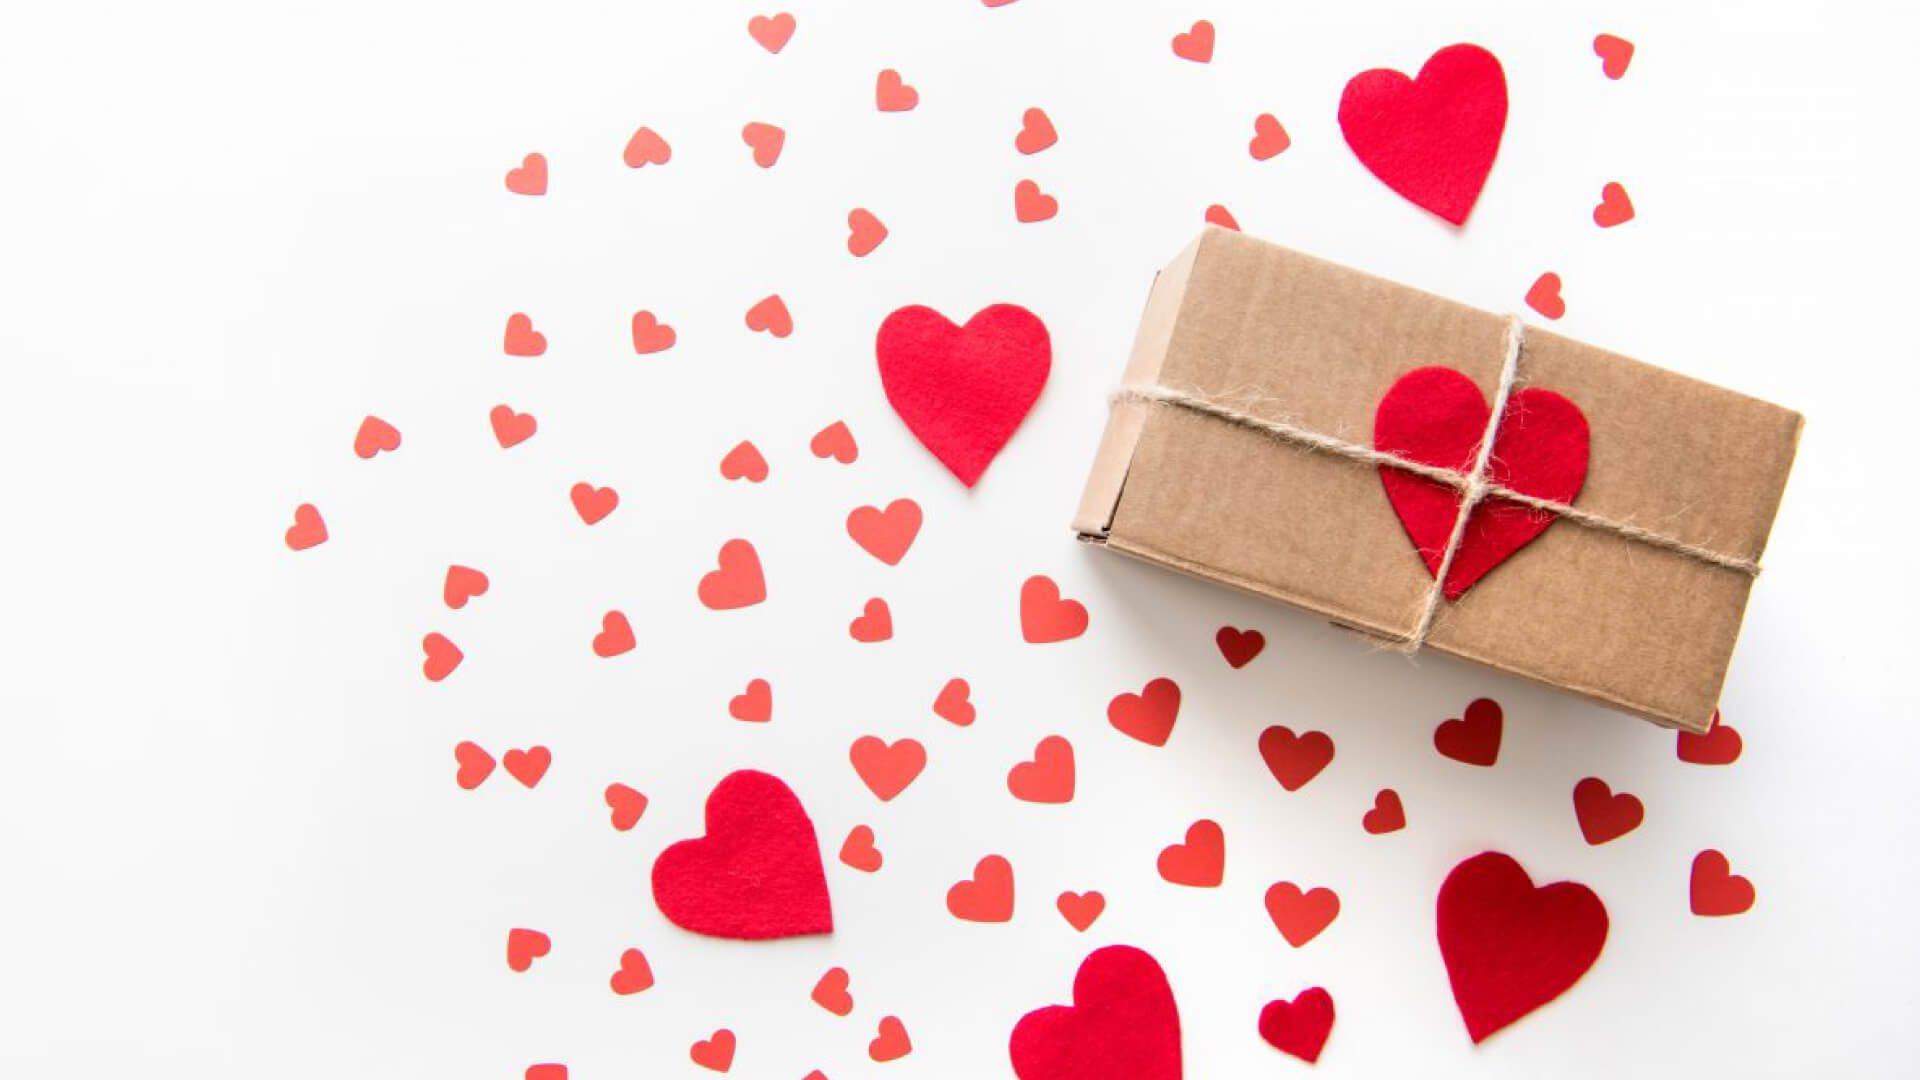 heart printed marketing ideas for valentine's day